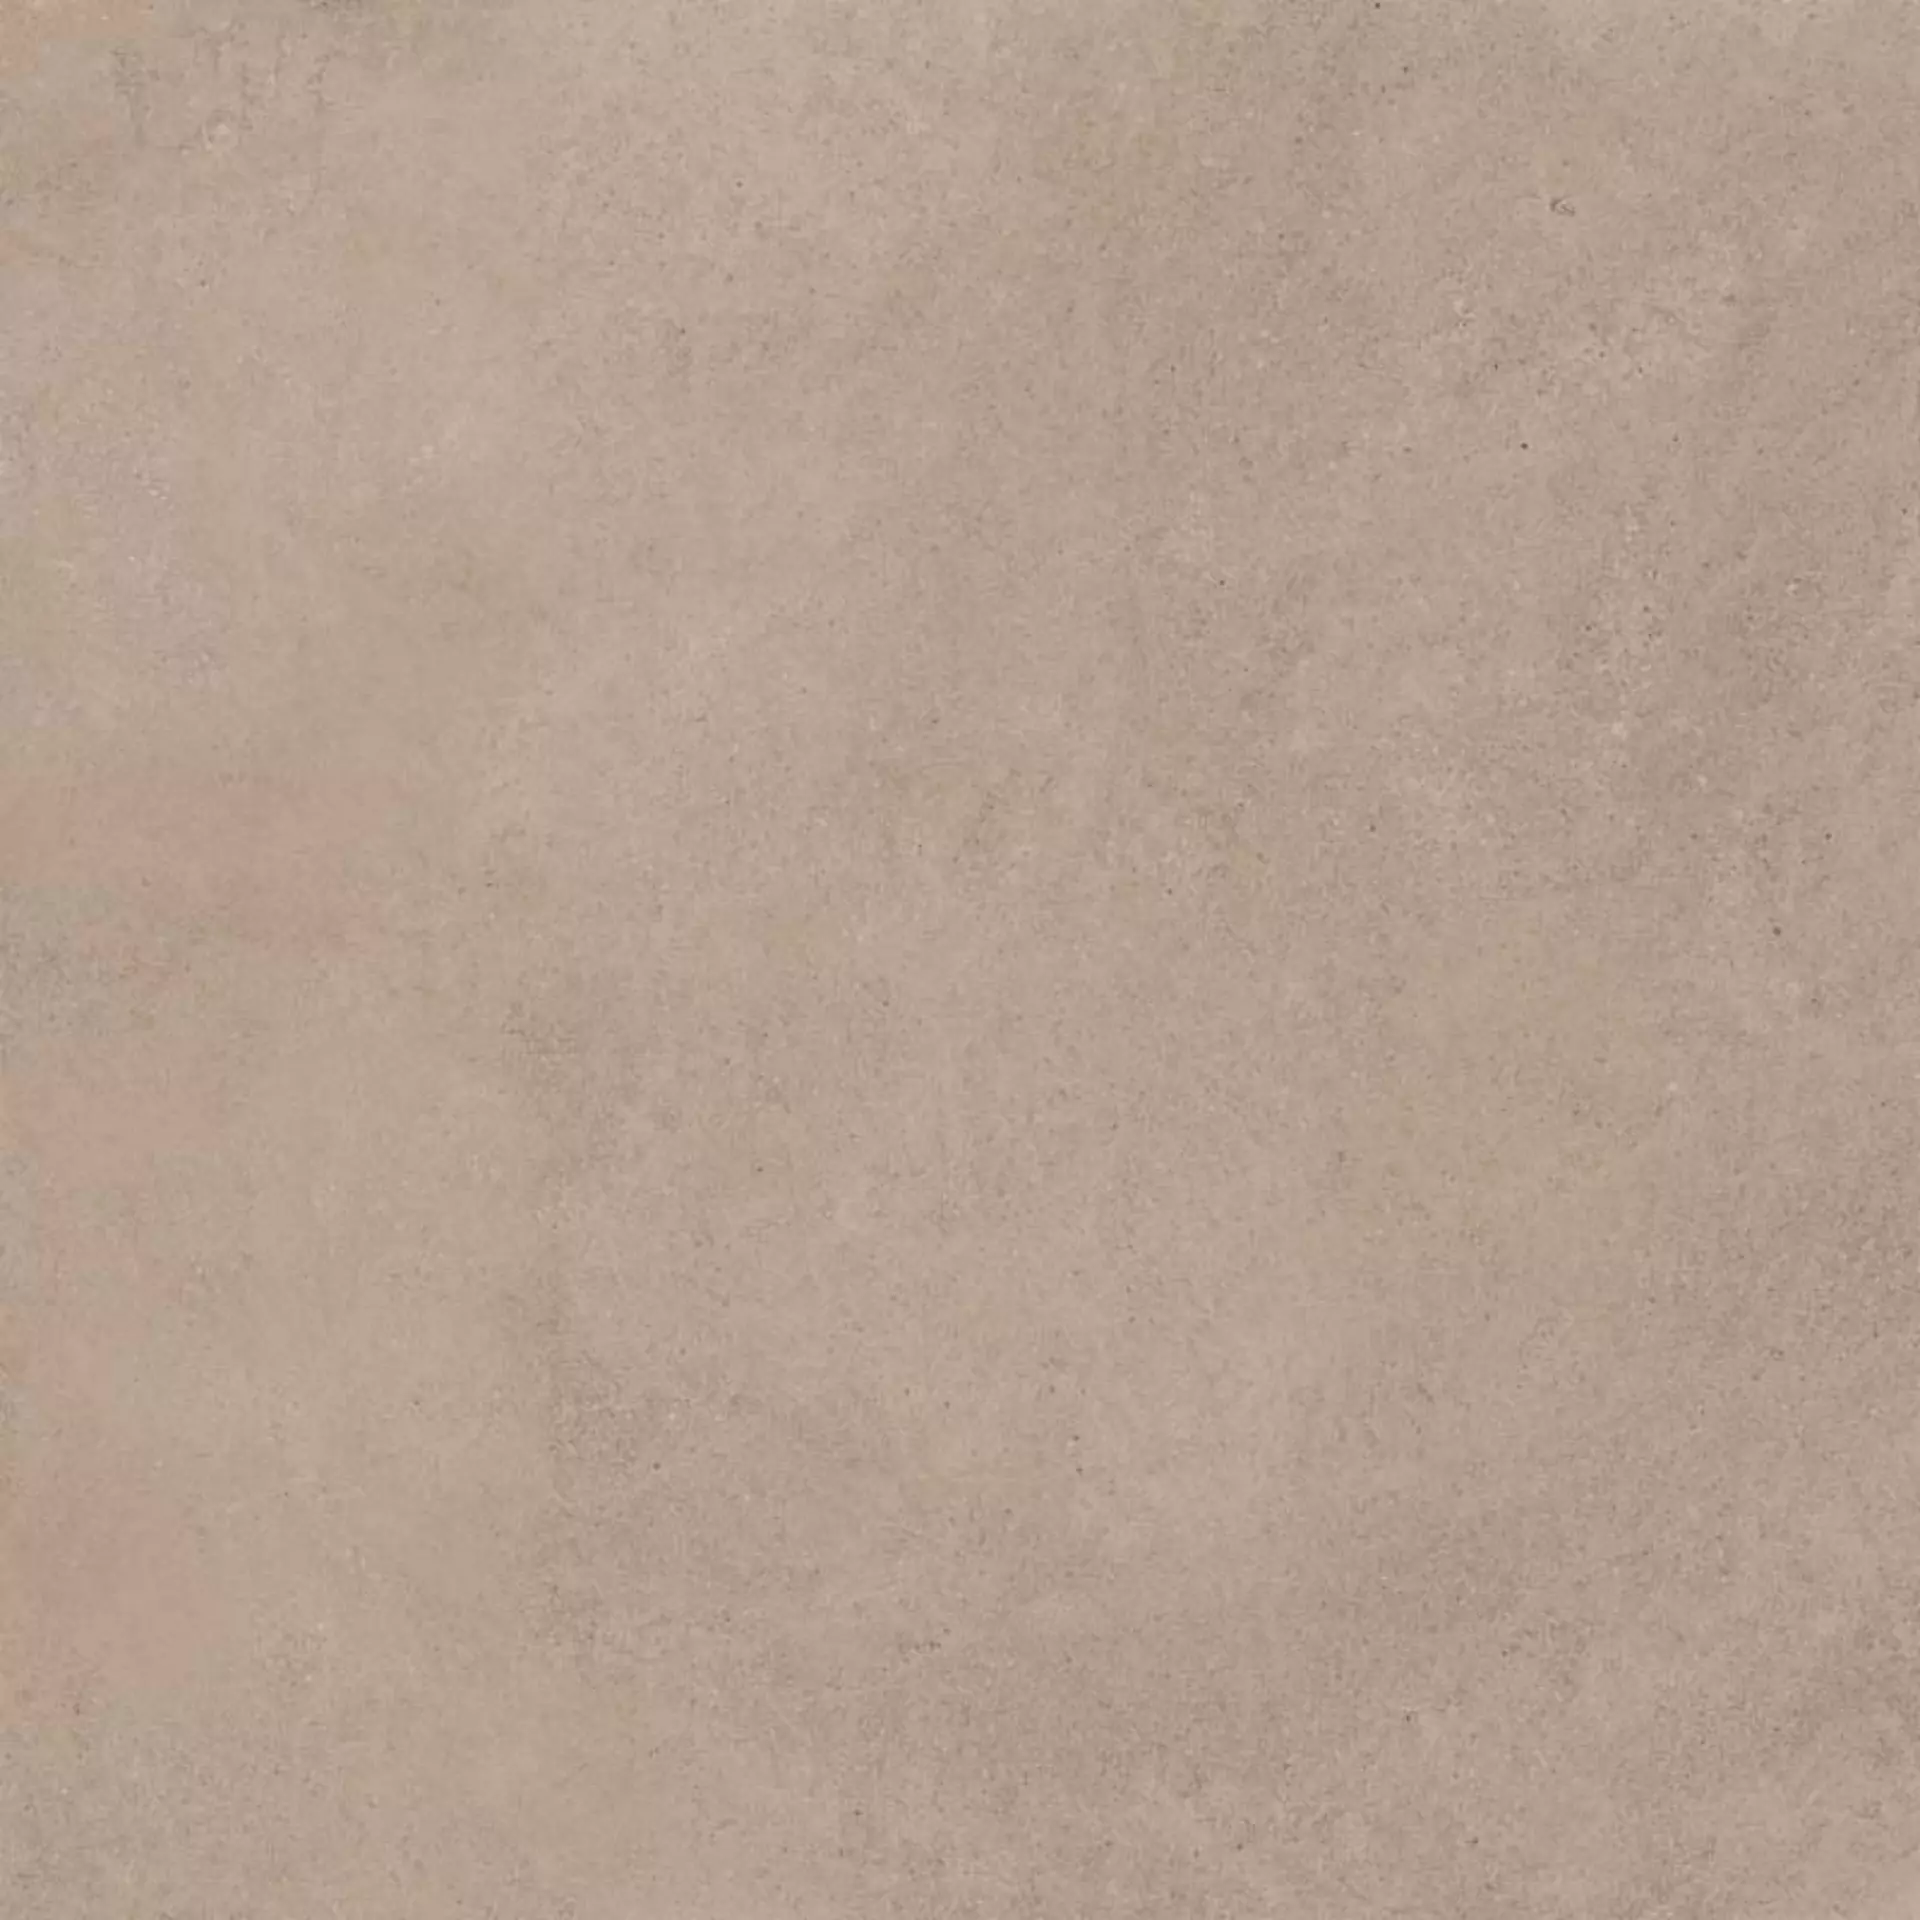 Sant Agostino Silkystone Taupe Natural CSASKSTA12 120x120cm rectified 10mm